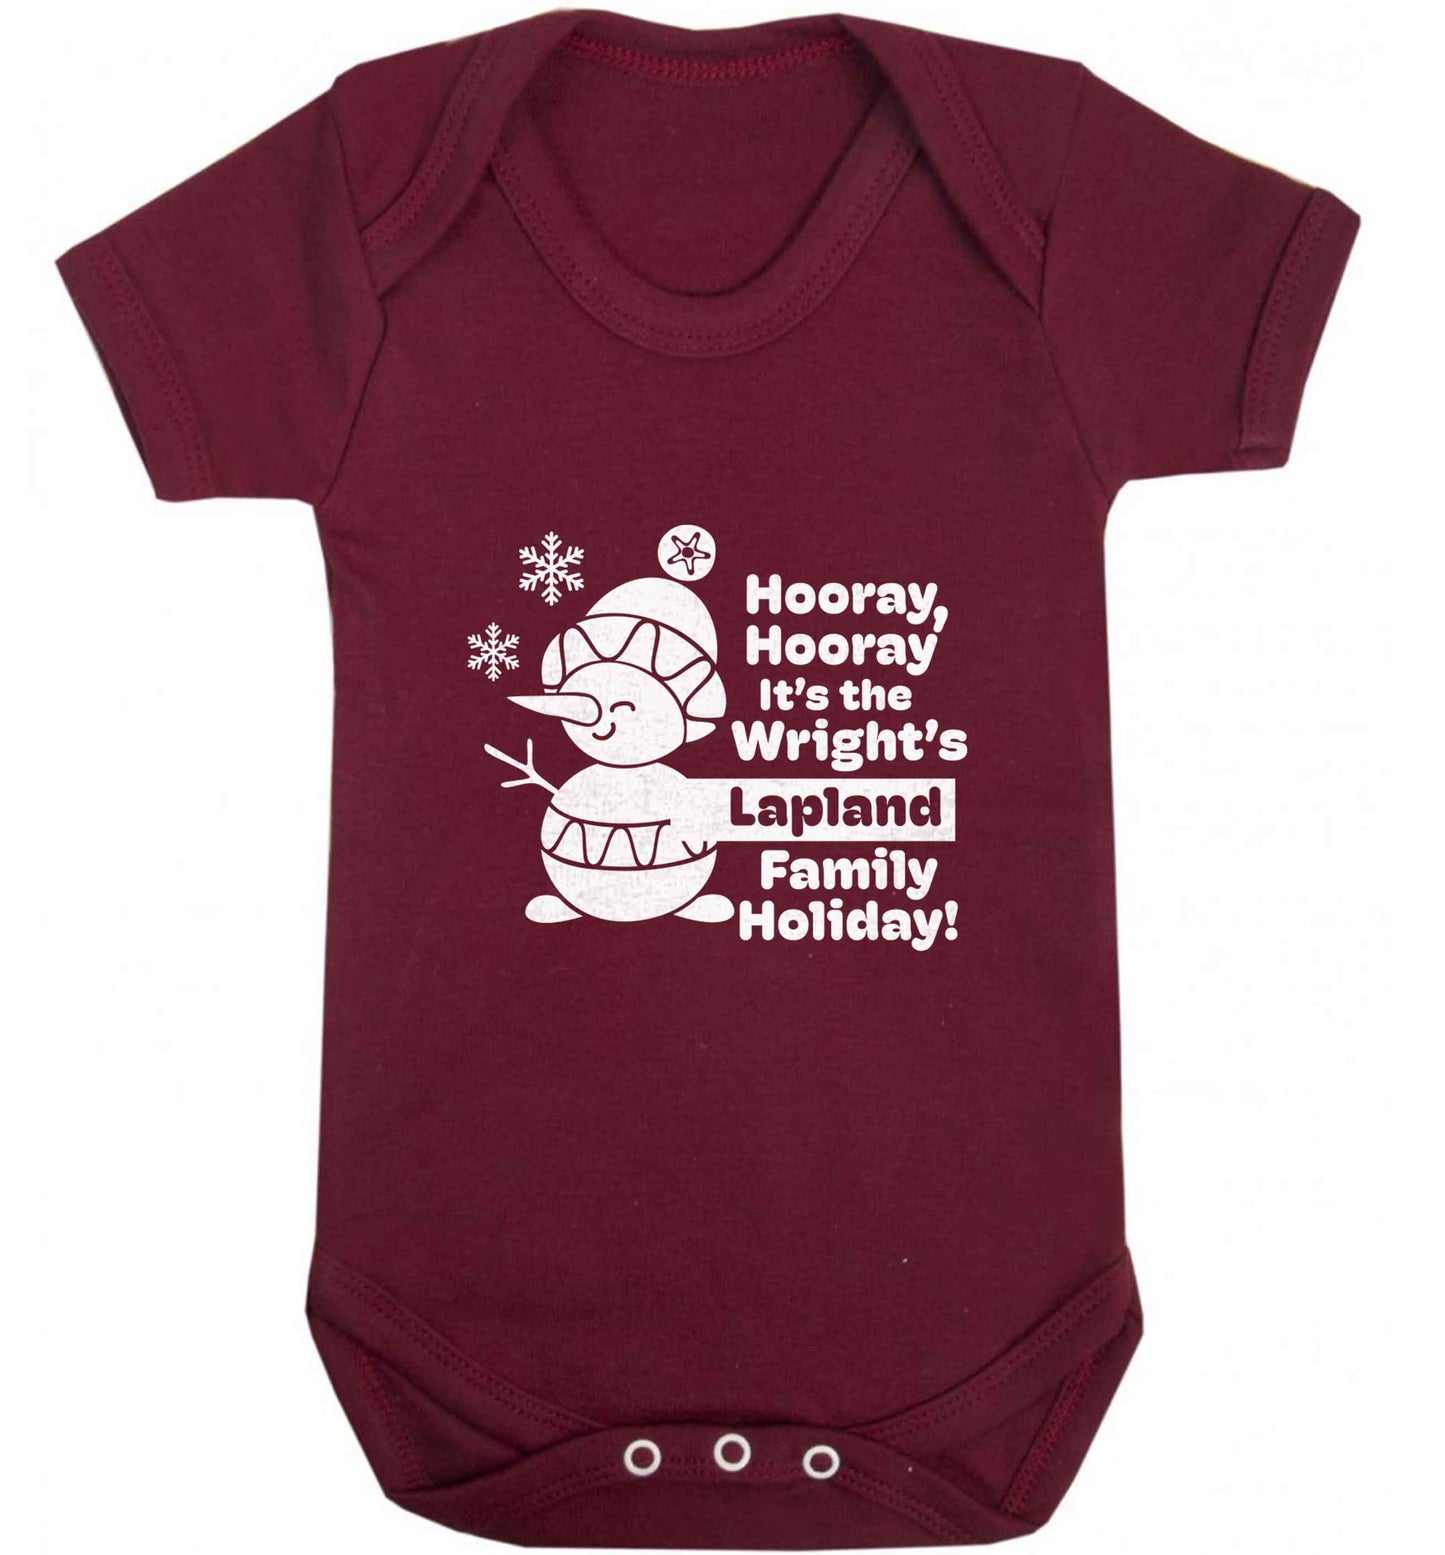 Hooray it's the personalised Lapland holiday! baby vest maroon 18-24 months